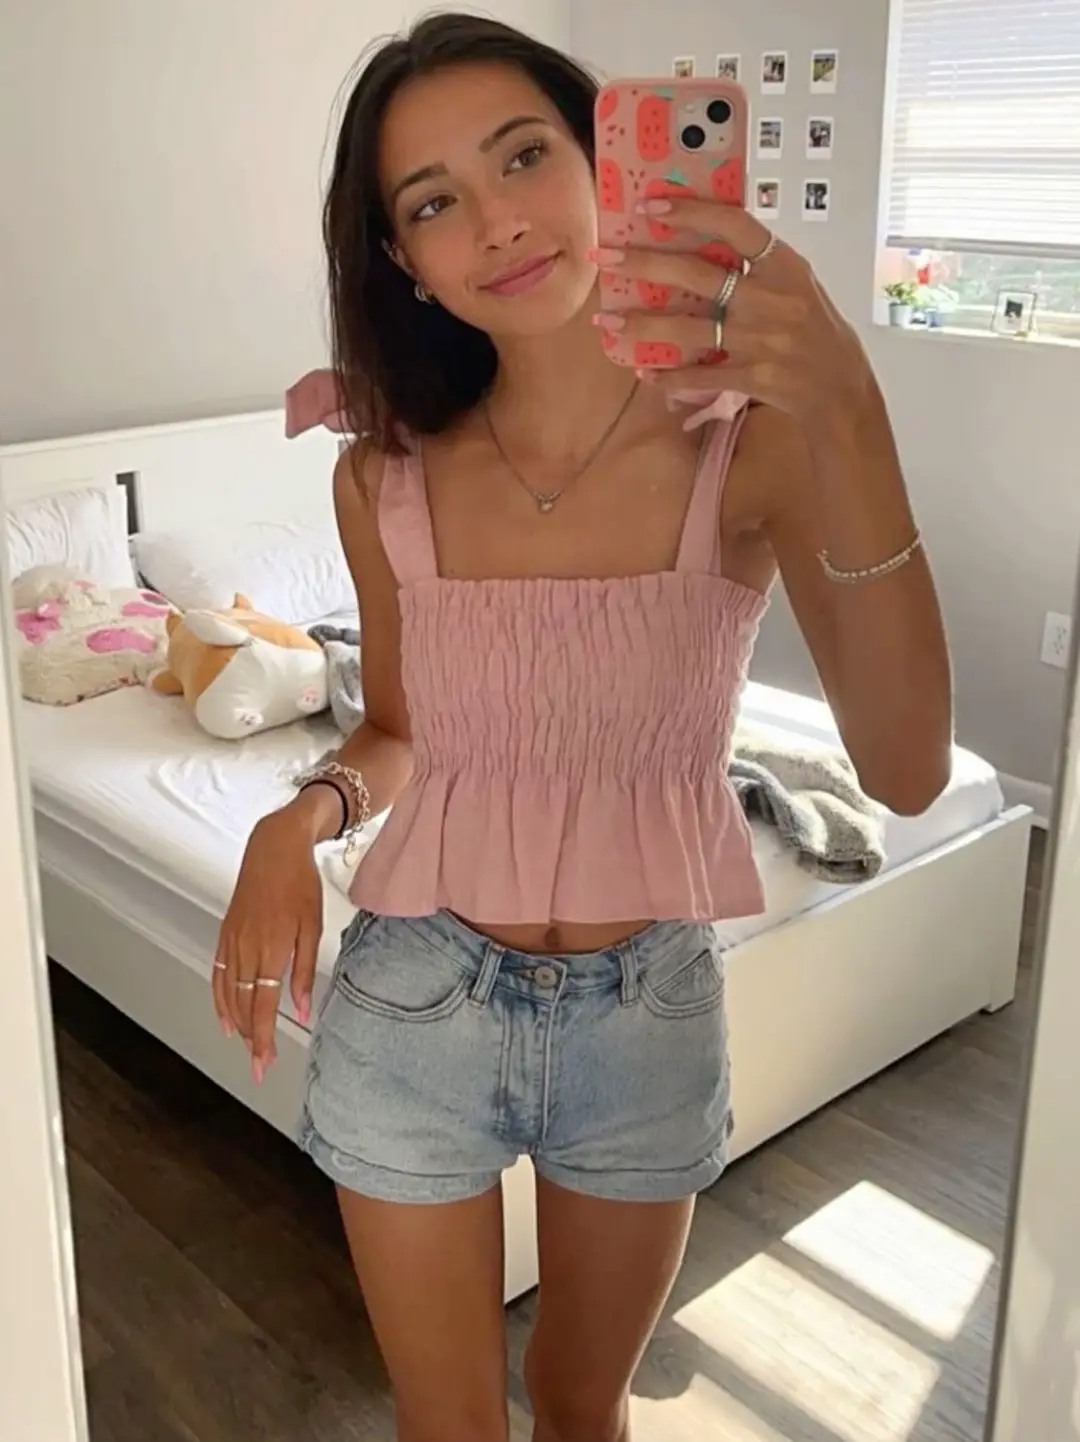  A woman in a pink shirt is taking a selfie in a mirror.